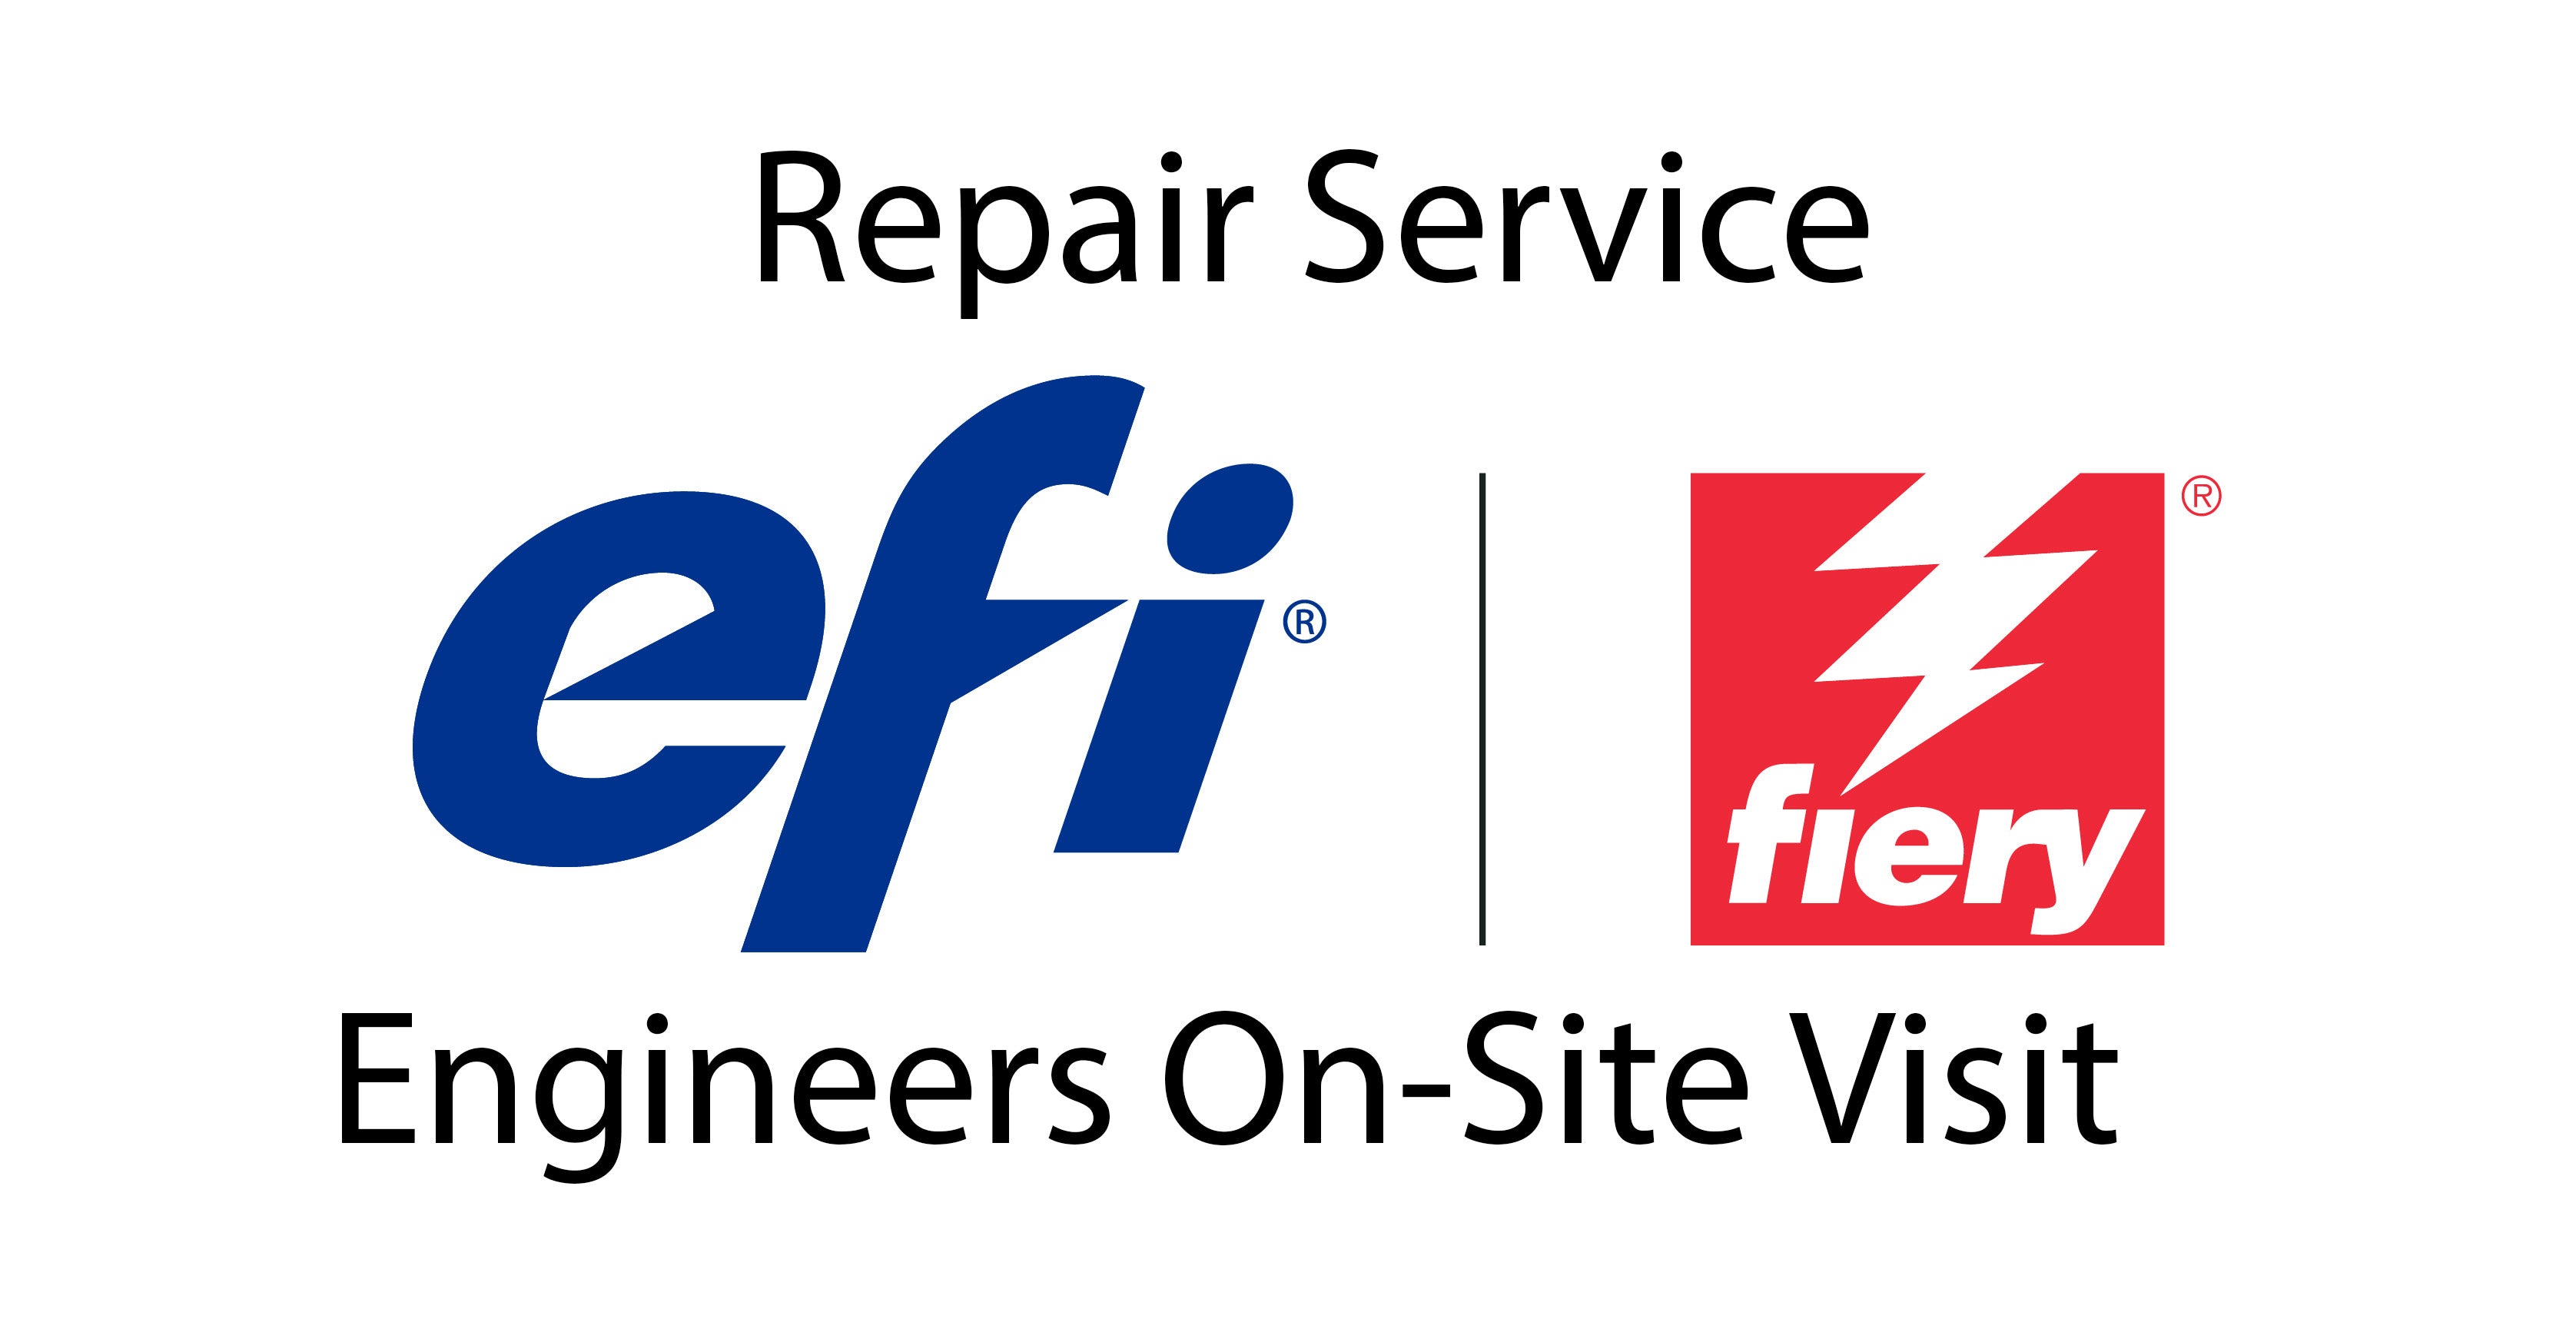 EFI Fiery Controller support for Xerox Machines - 60 minutes on-site Technician Visit